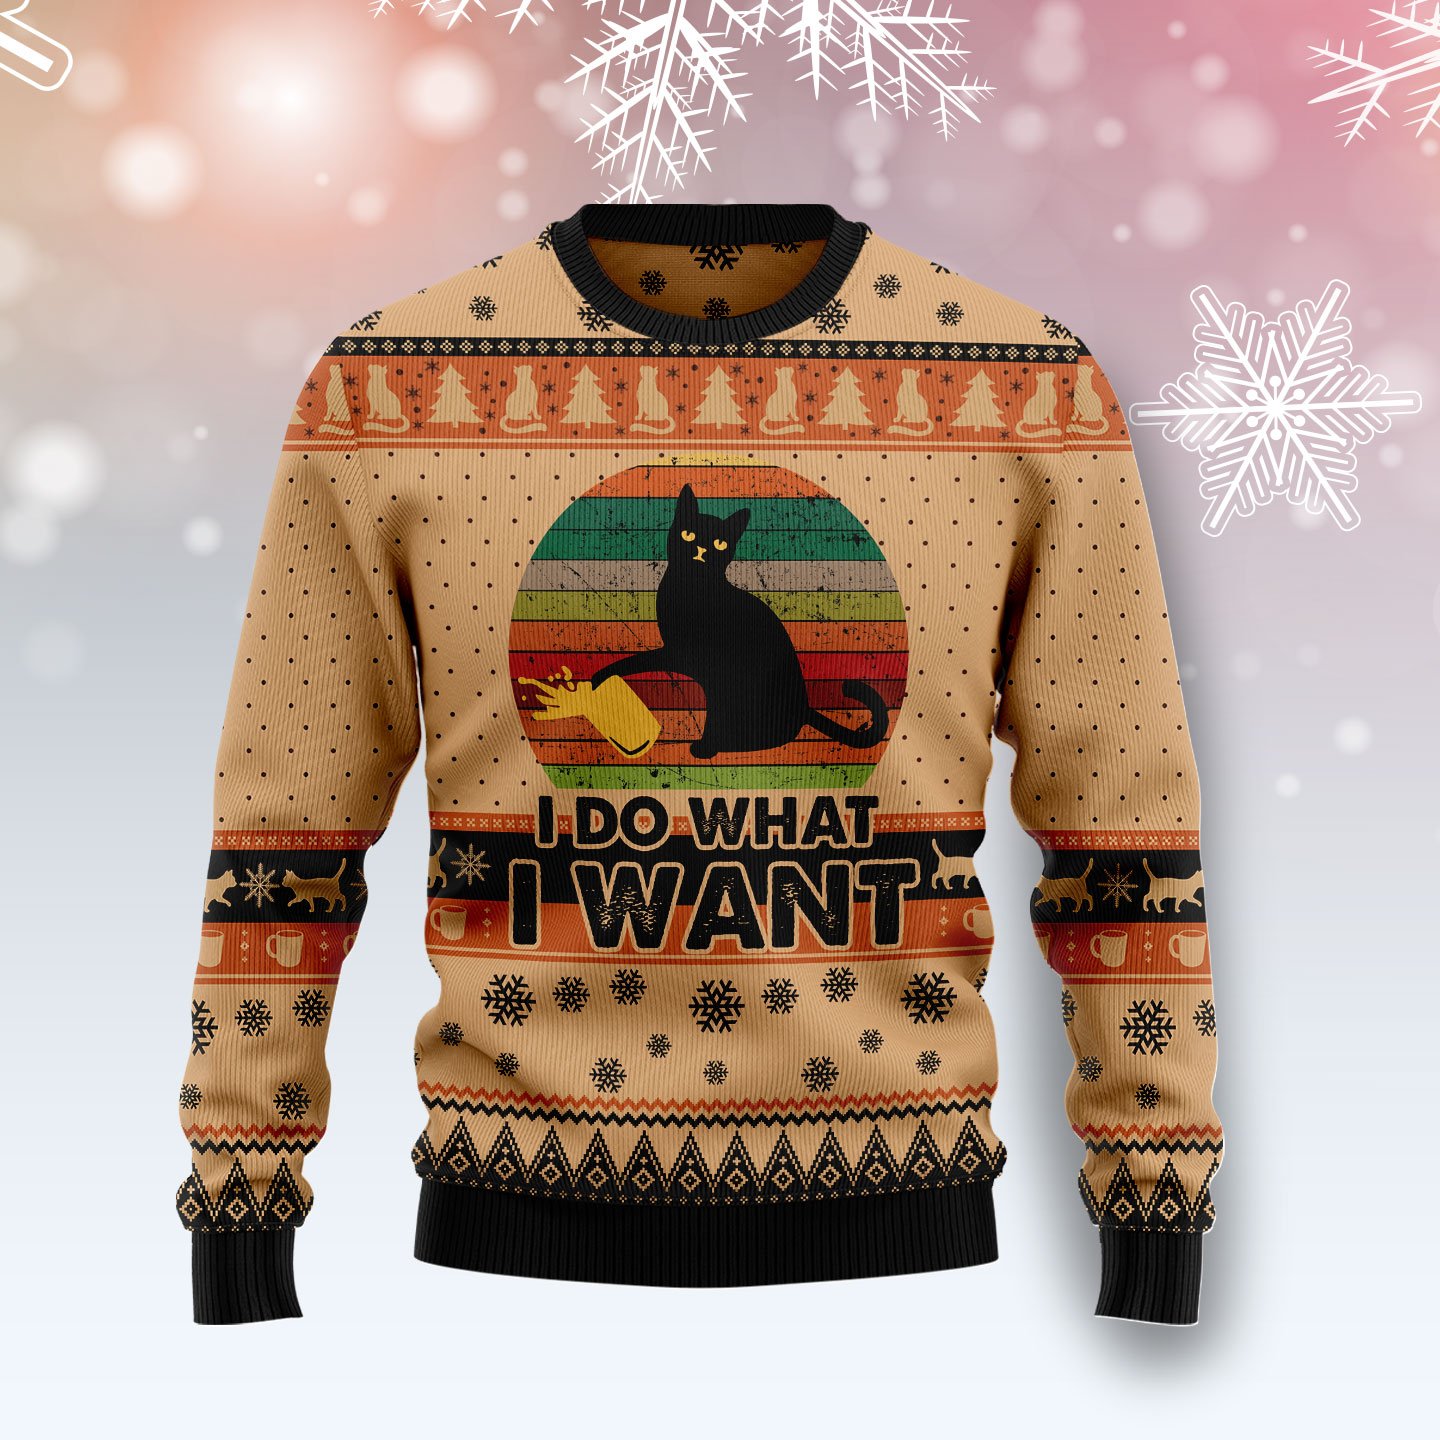 I Do What A Want Black Cat Tg5112 Ugly Christmas Sweater